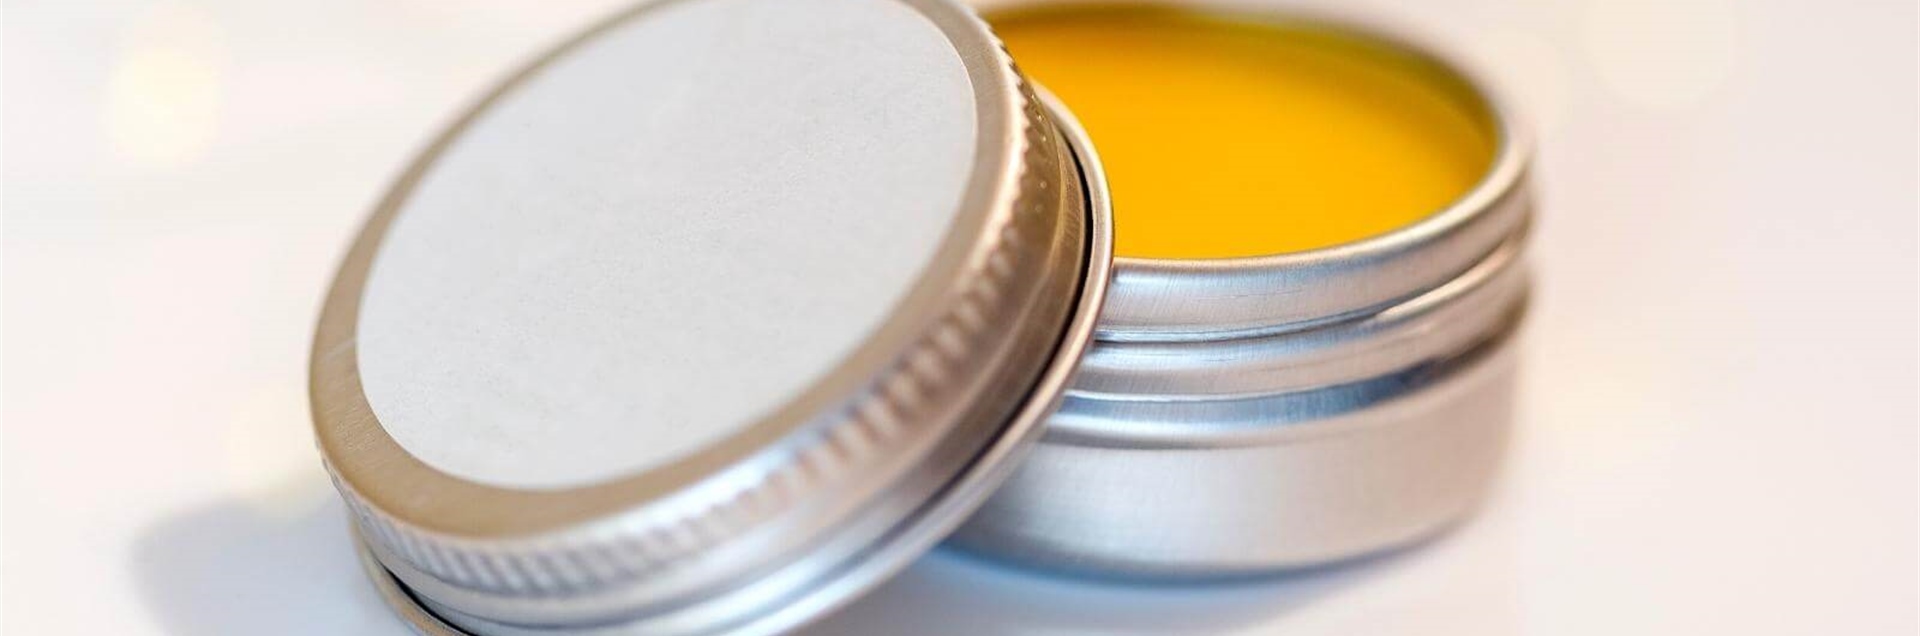 How to make solid perfume at home